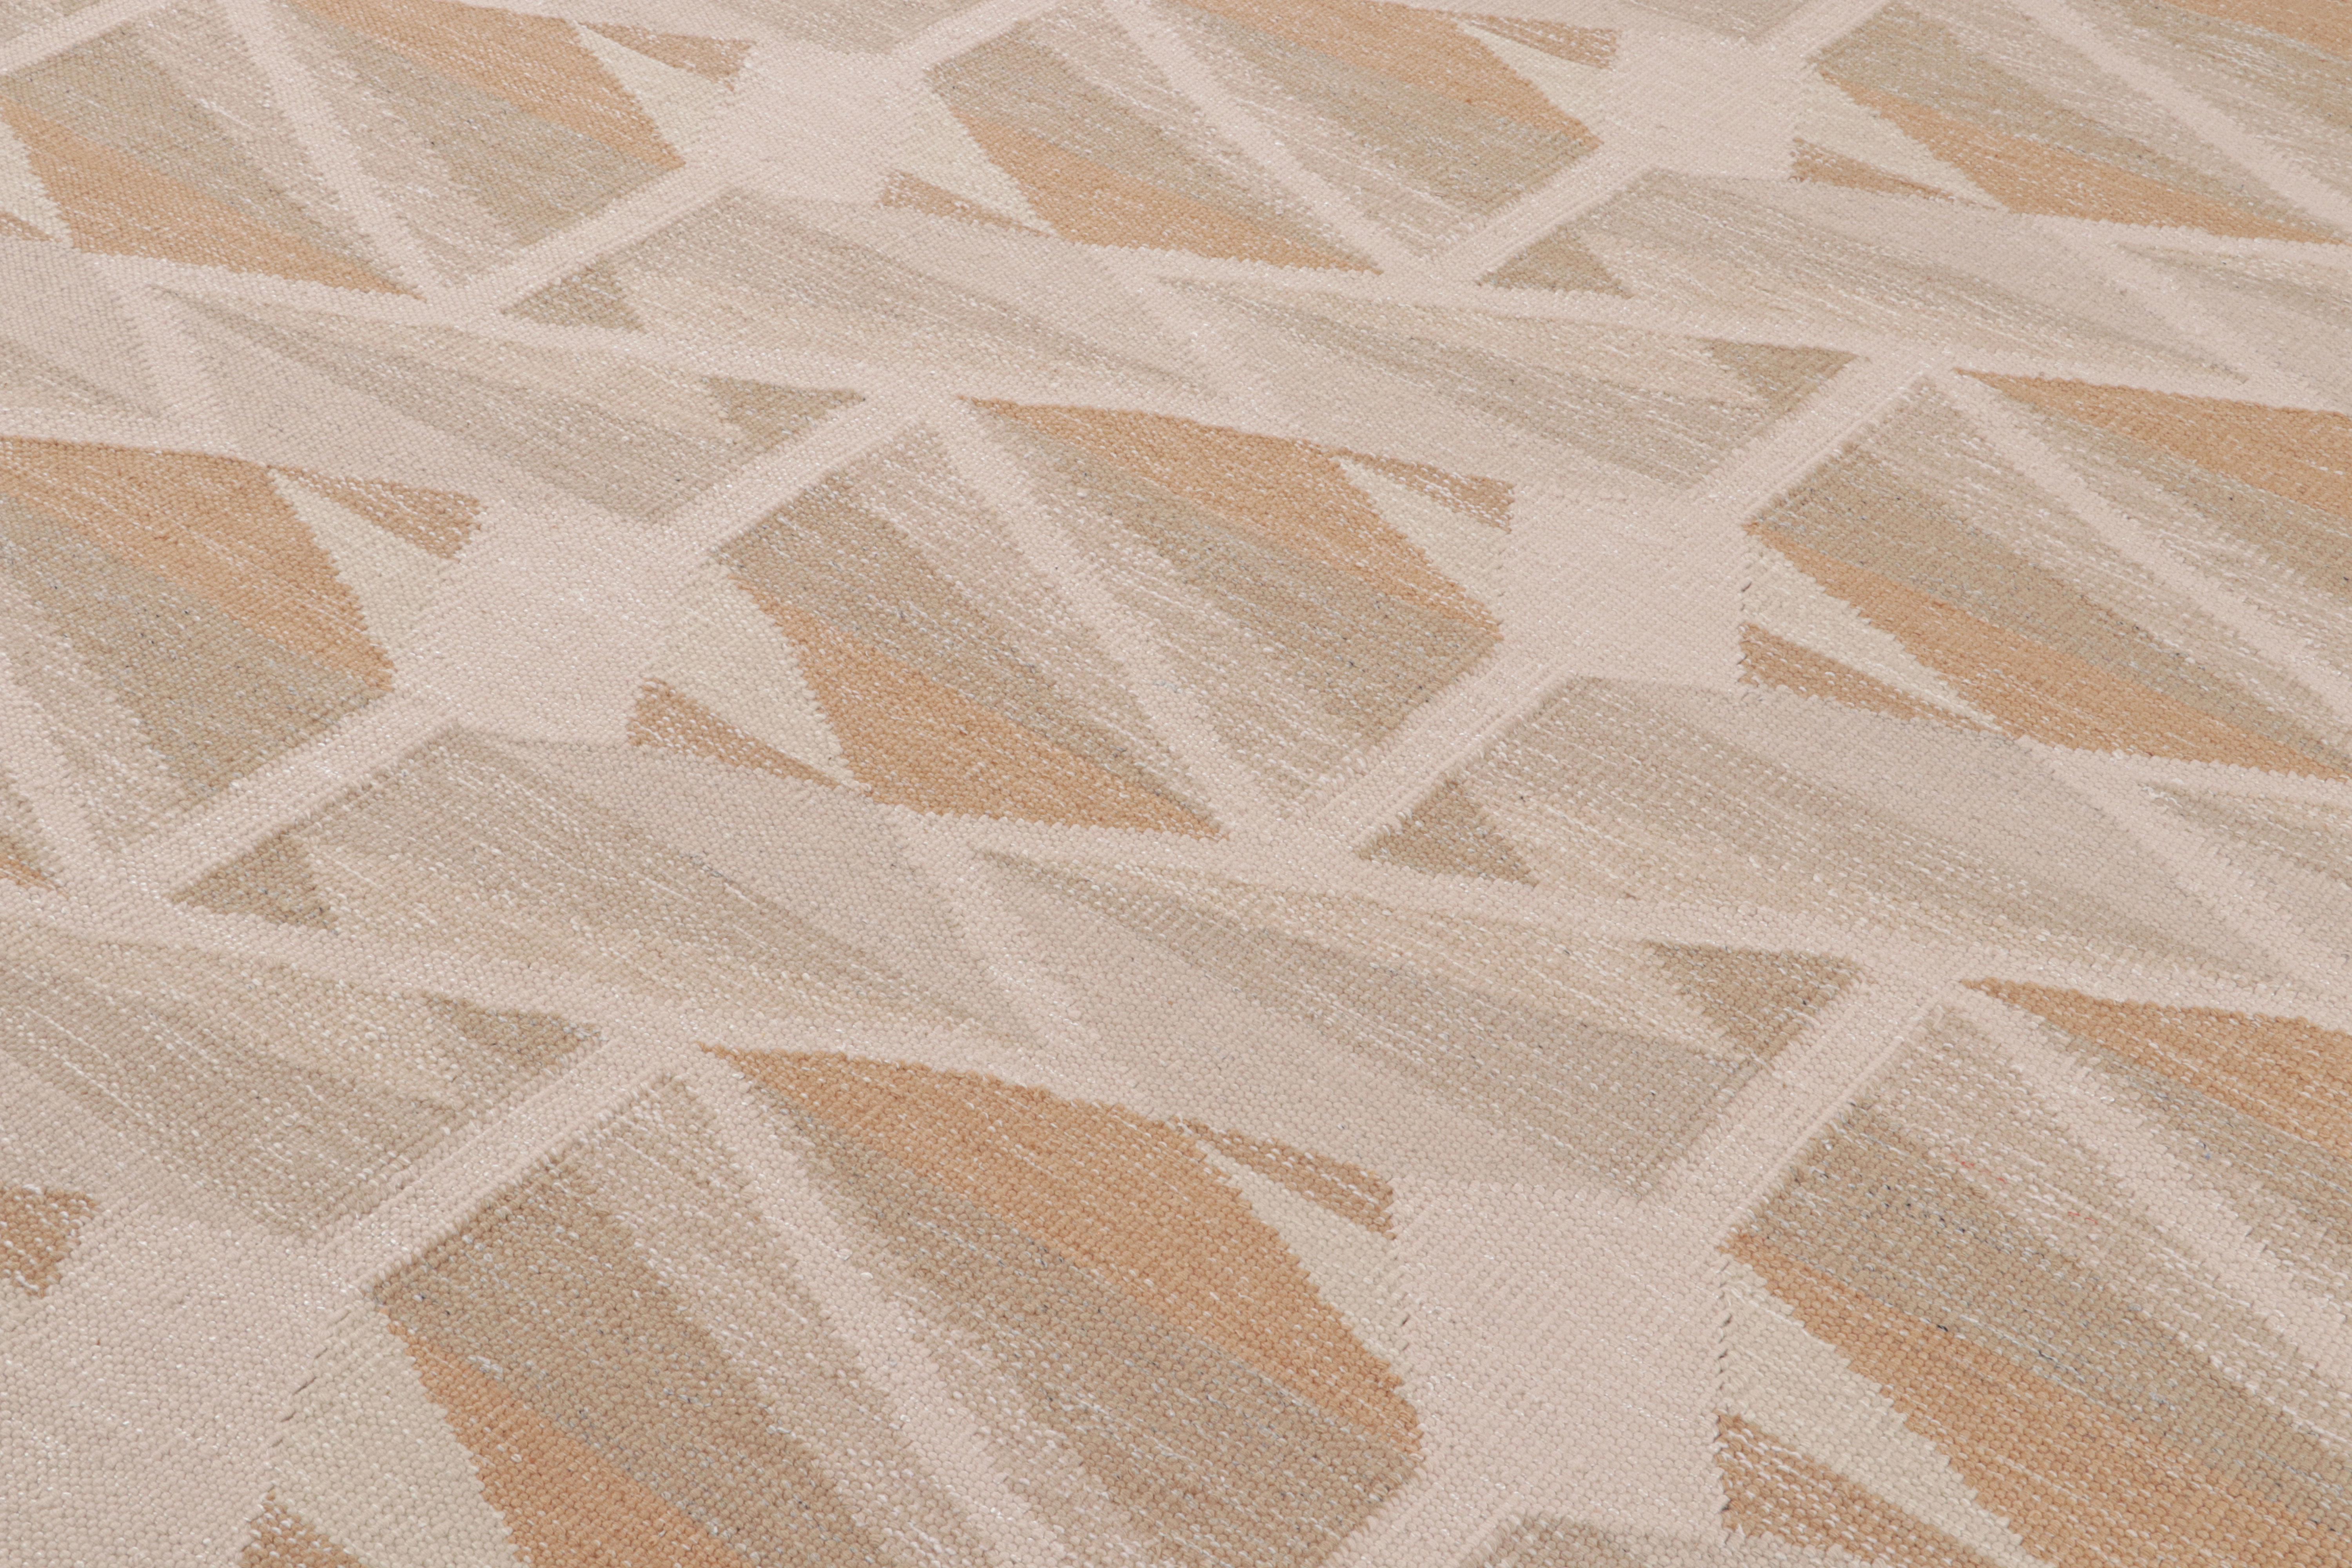 Handwoven in wool, this 8x10 rug features beige-brown, white and terracotta tones underscore geometric patterns inspired by the Swedish minimalist style.  

On the design: 

Keen eyes may admire a subtle colorway that favors a unique play of beige,